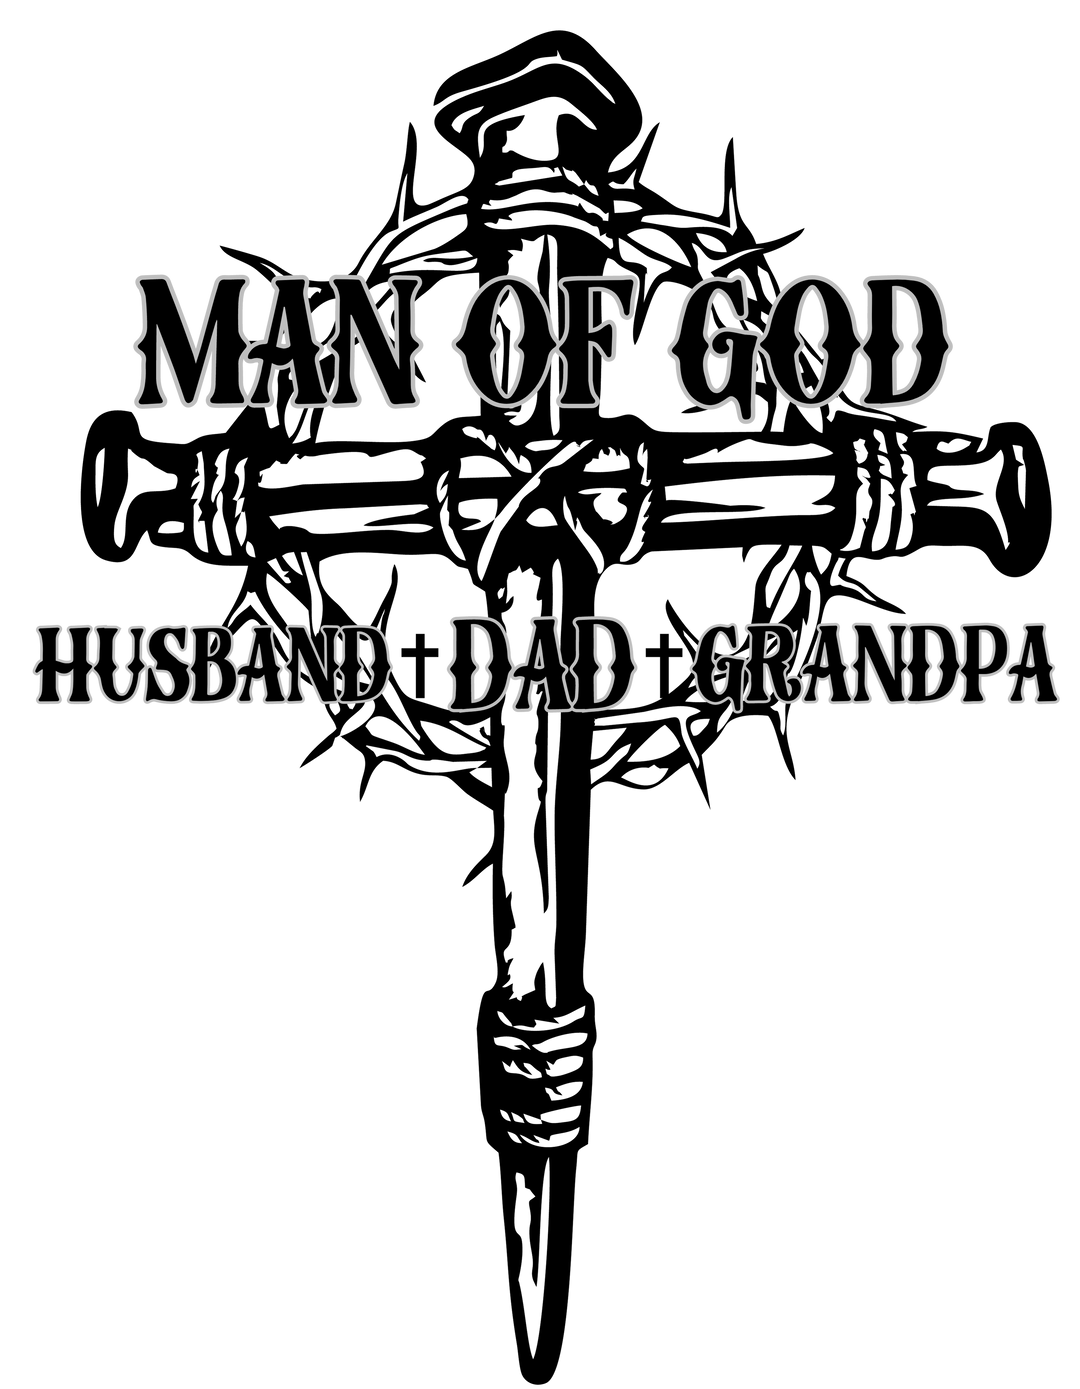 A black and white logo tee, Man of God Husband Dad Grandpa Tee, from Worlds Worst Tees. 100% ring-spun cotton, medium weight, relaxed fit, durable double-needle stitching, seamless design for comfort.